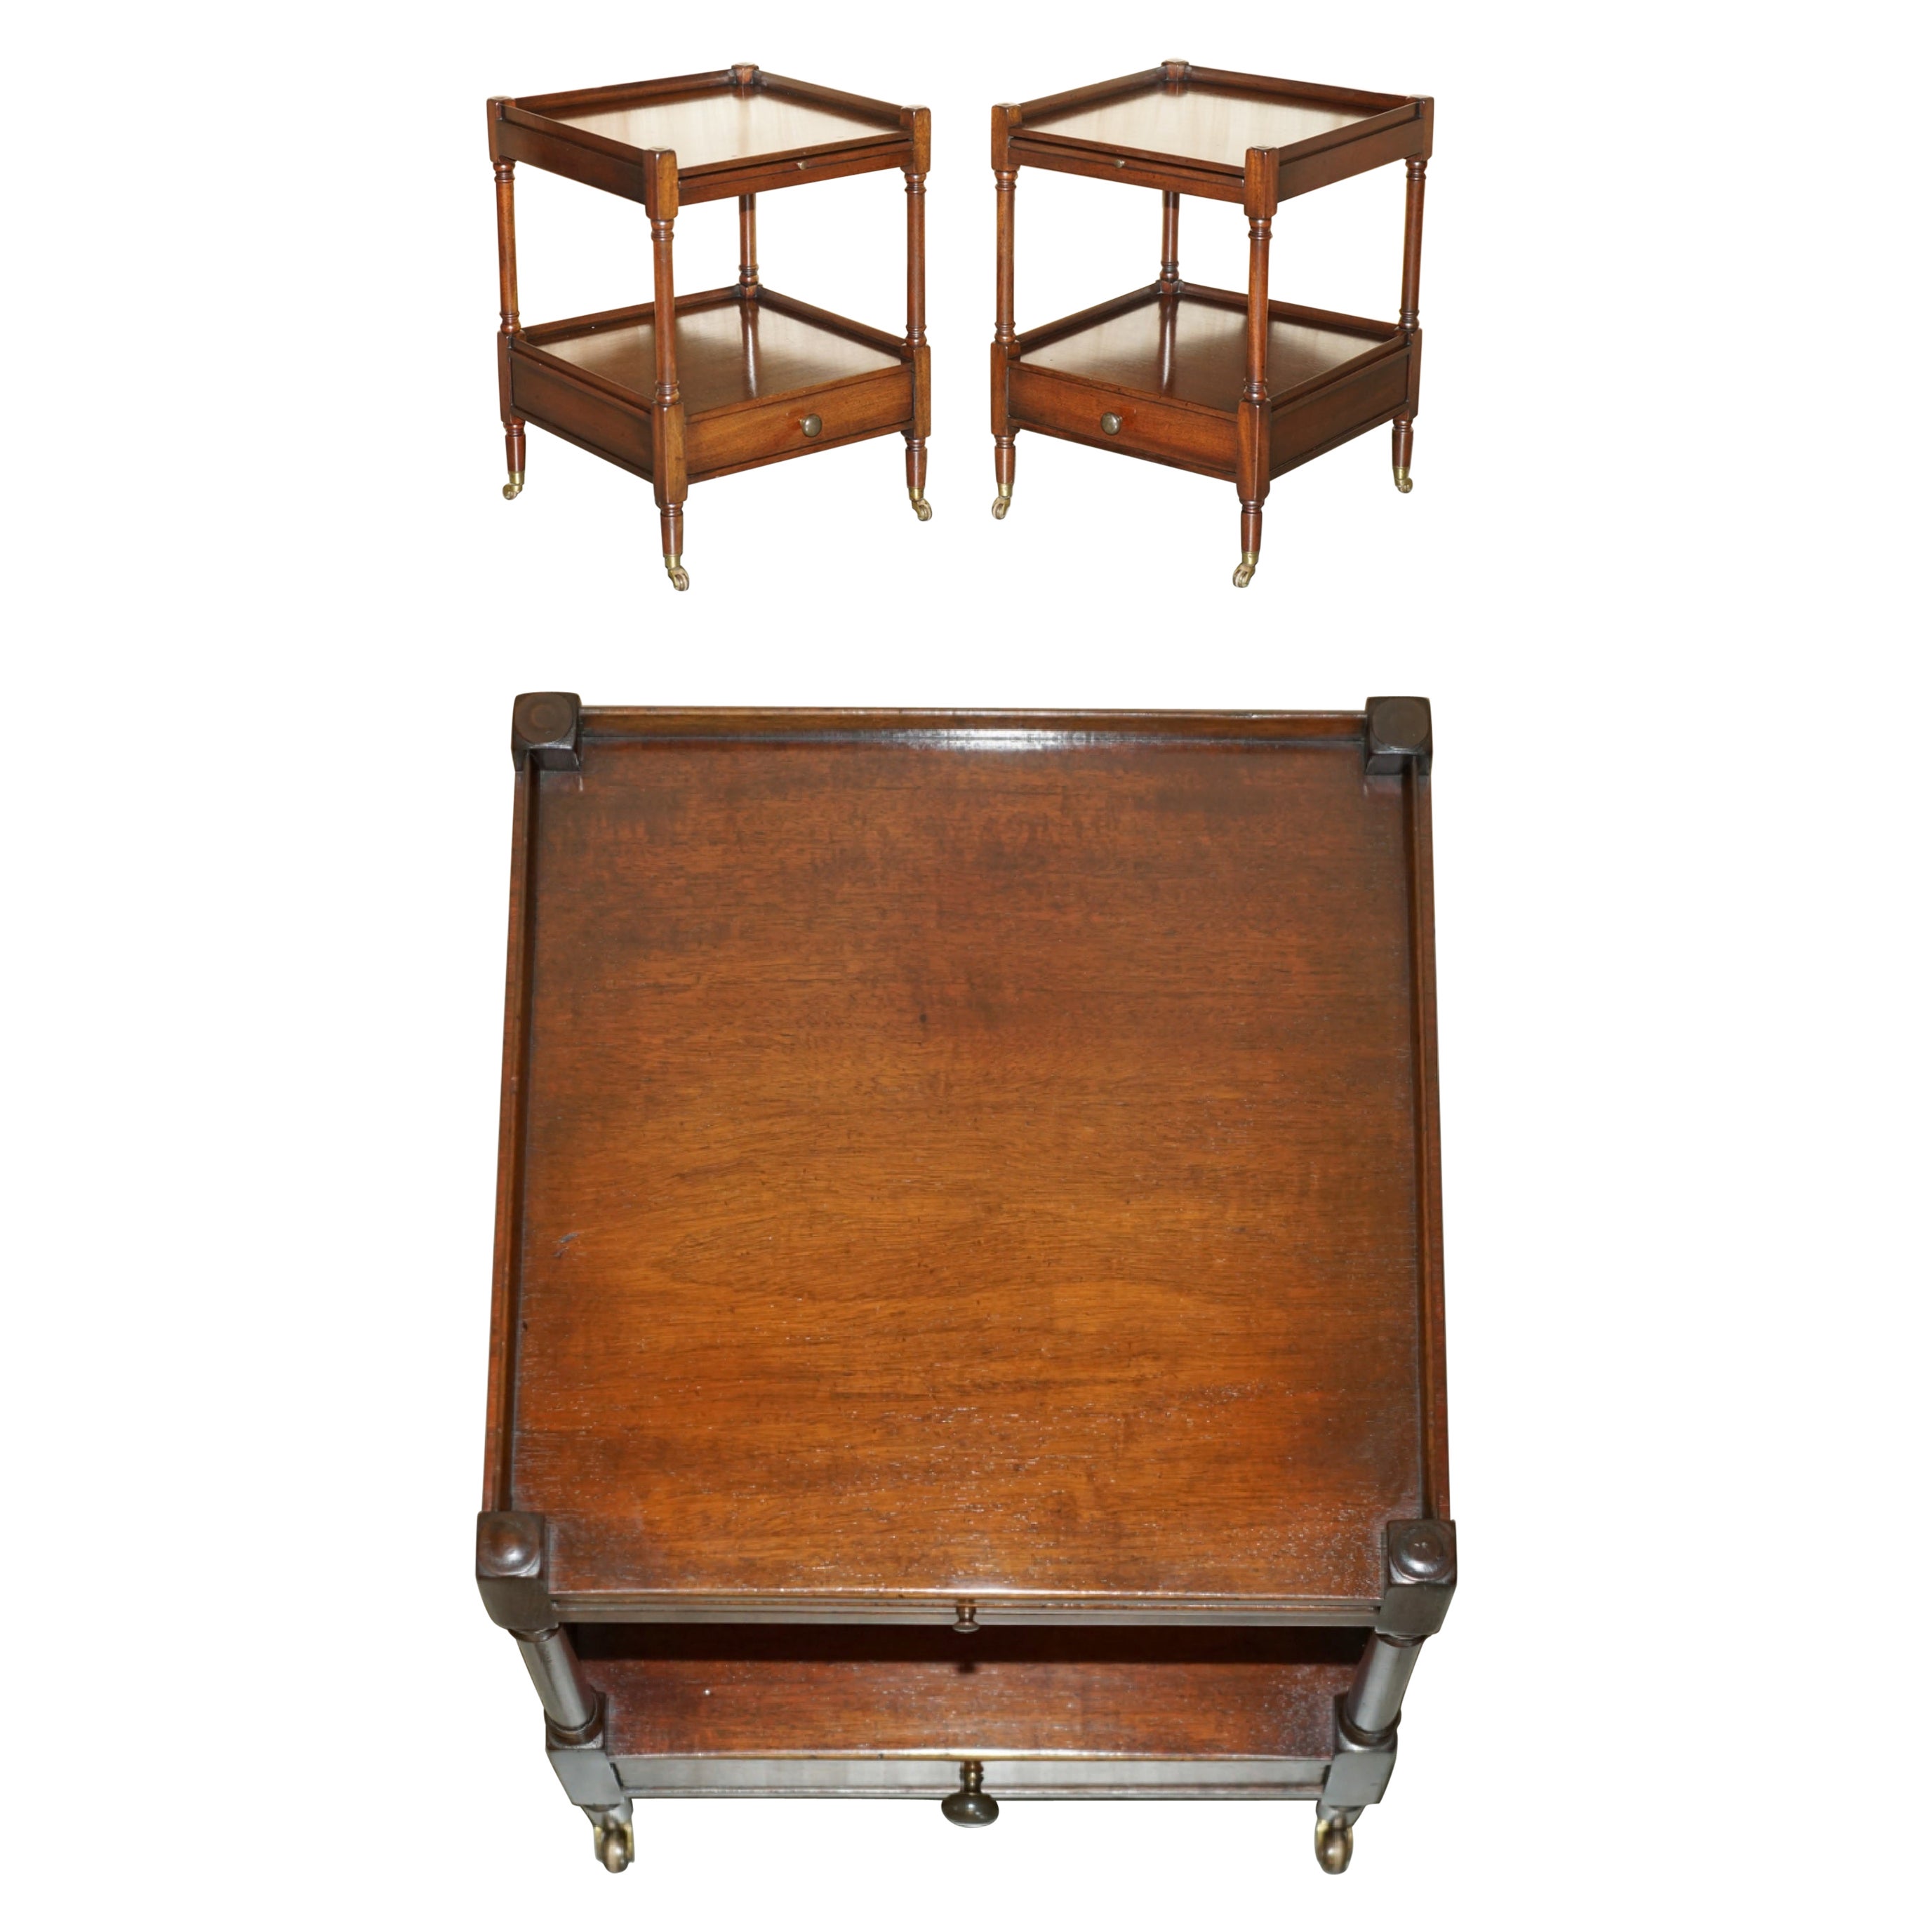 PAIR OF STUNNiNG TWO TIERED SIDE TABLES WITH BROWN LEATHER BUTLERS SERVING TRAYS